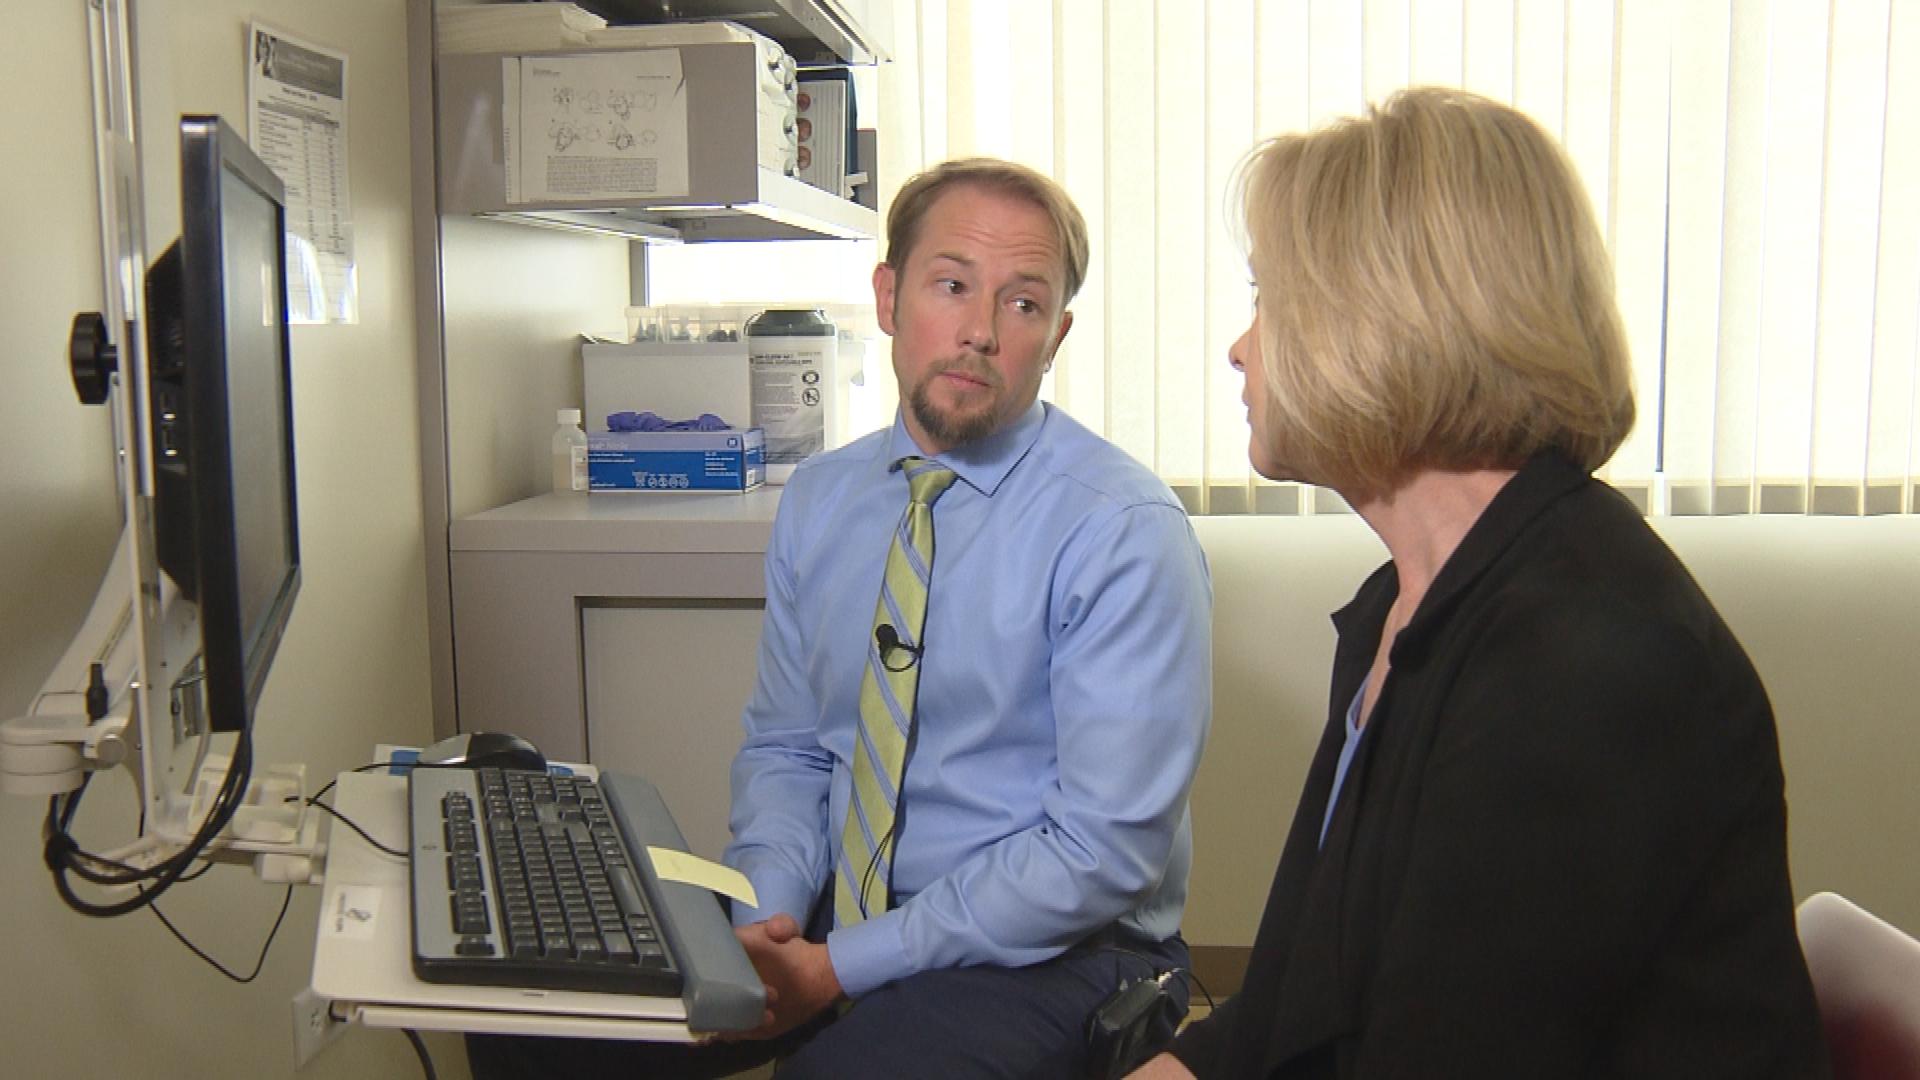 Dr. Ryan Brown is interviewed by CBS4's Kathy Walsh (credit: CBS)